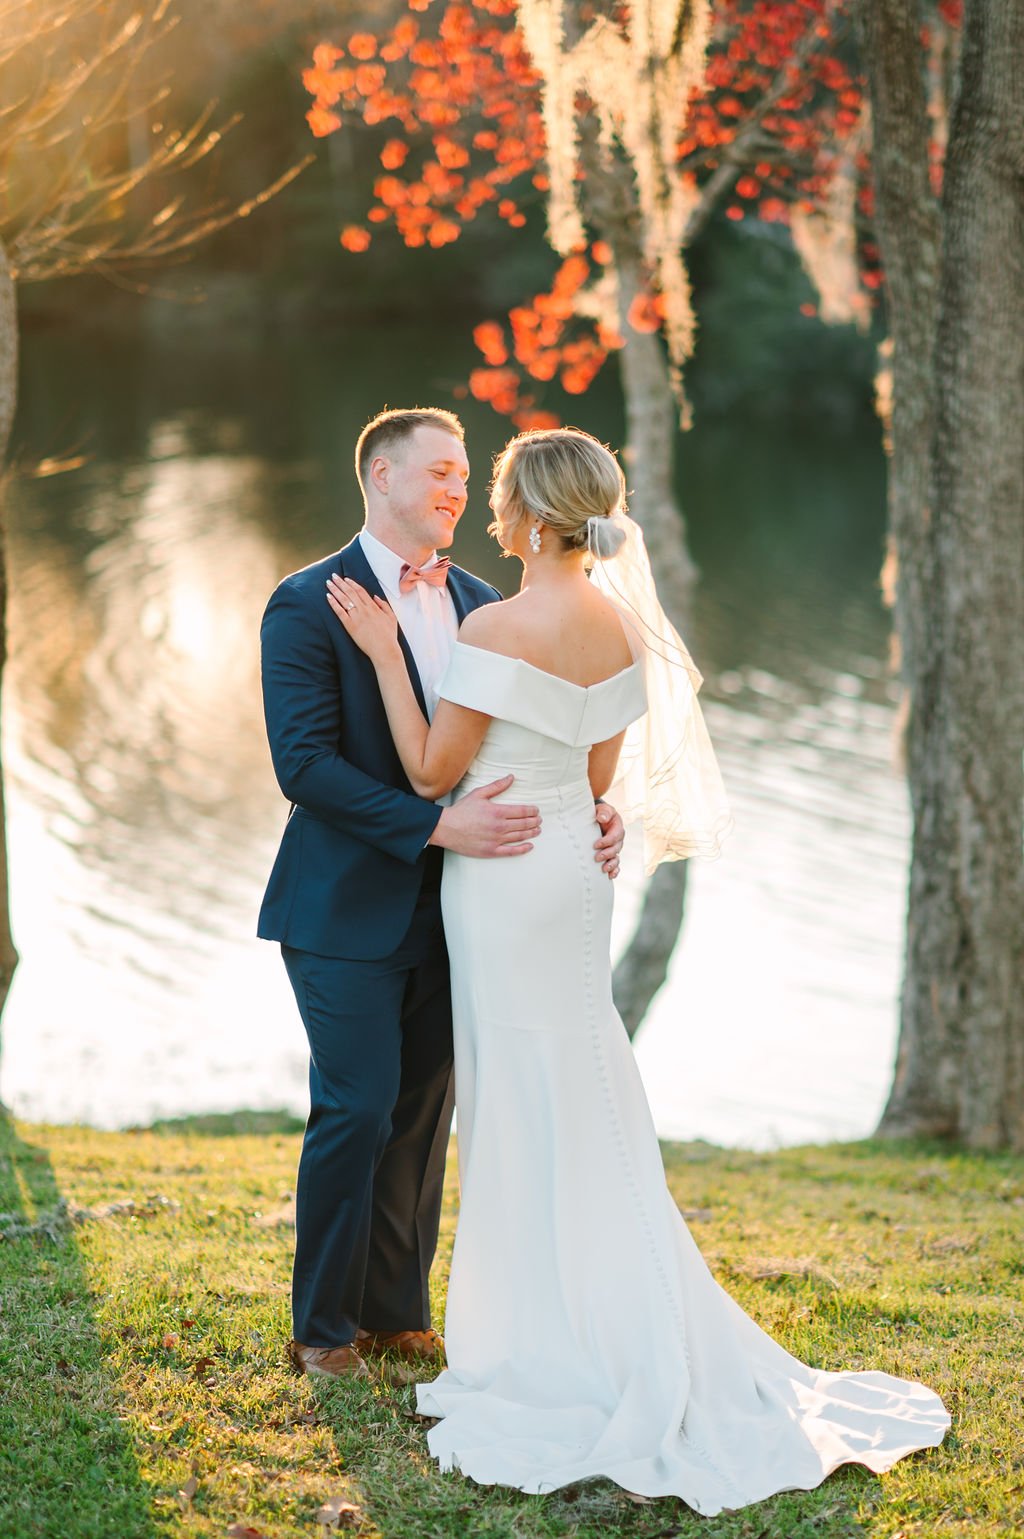 delaney-and-joshuas-real-savannah-wedding-at-red-gate-farms-planned-by-savannah-wedding-planner-ivory-and-beau-with-wedding-florals-from-savannah-wedding-florist-ivory-and-beau-shot-by-5d-photography-savannah-wedding-savannah-bride-16.jpg